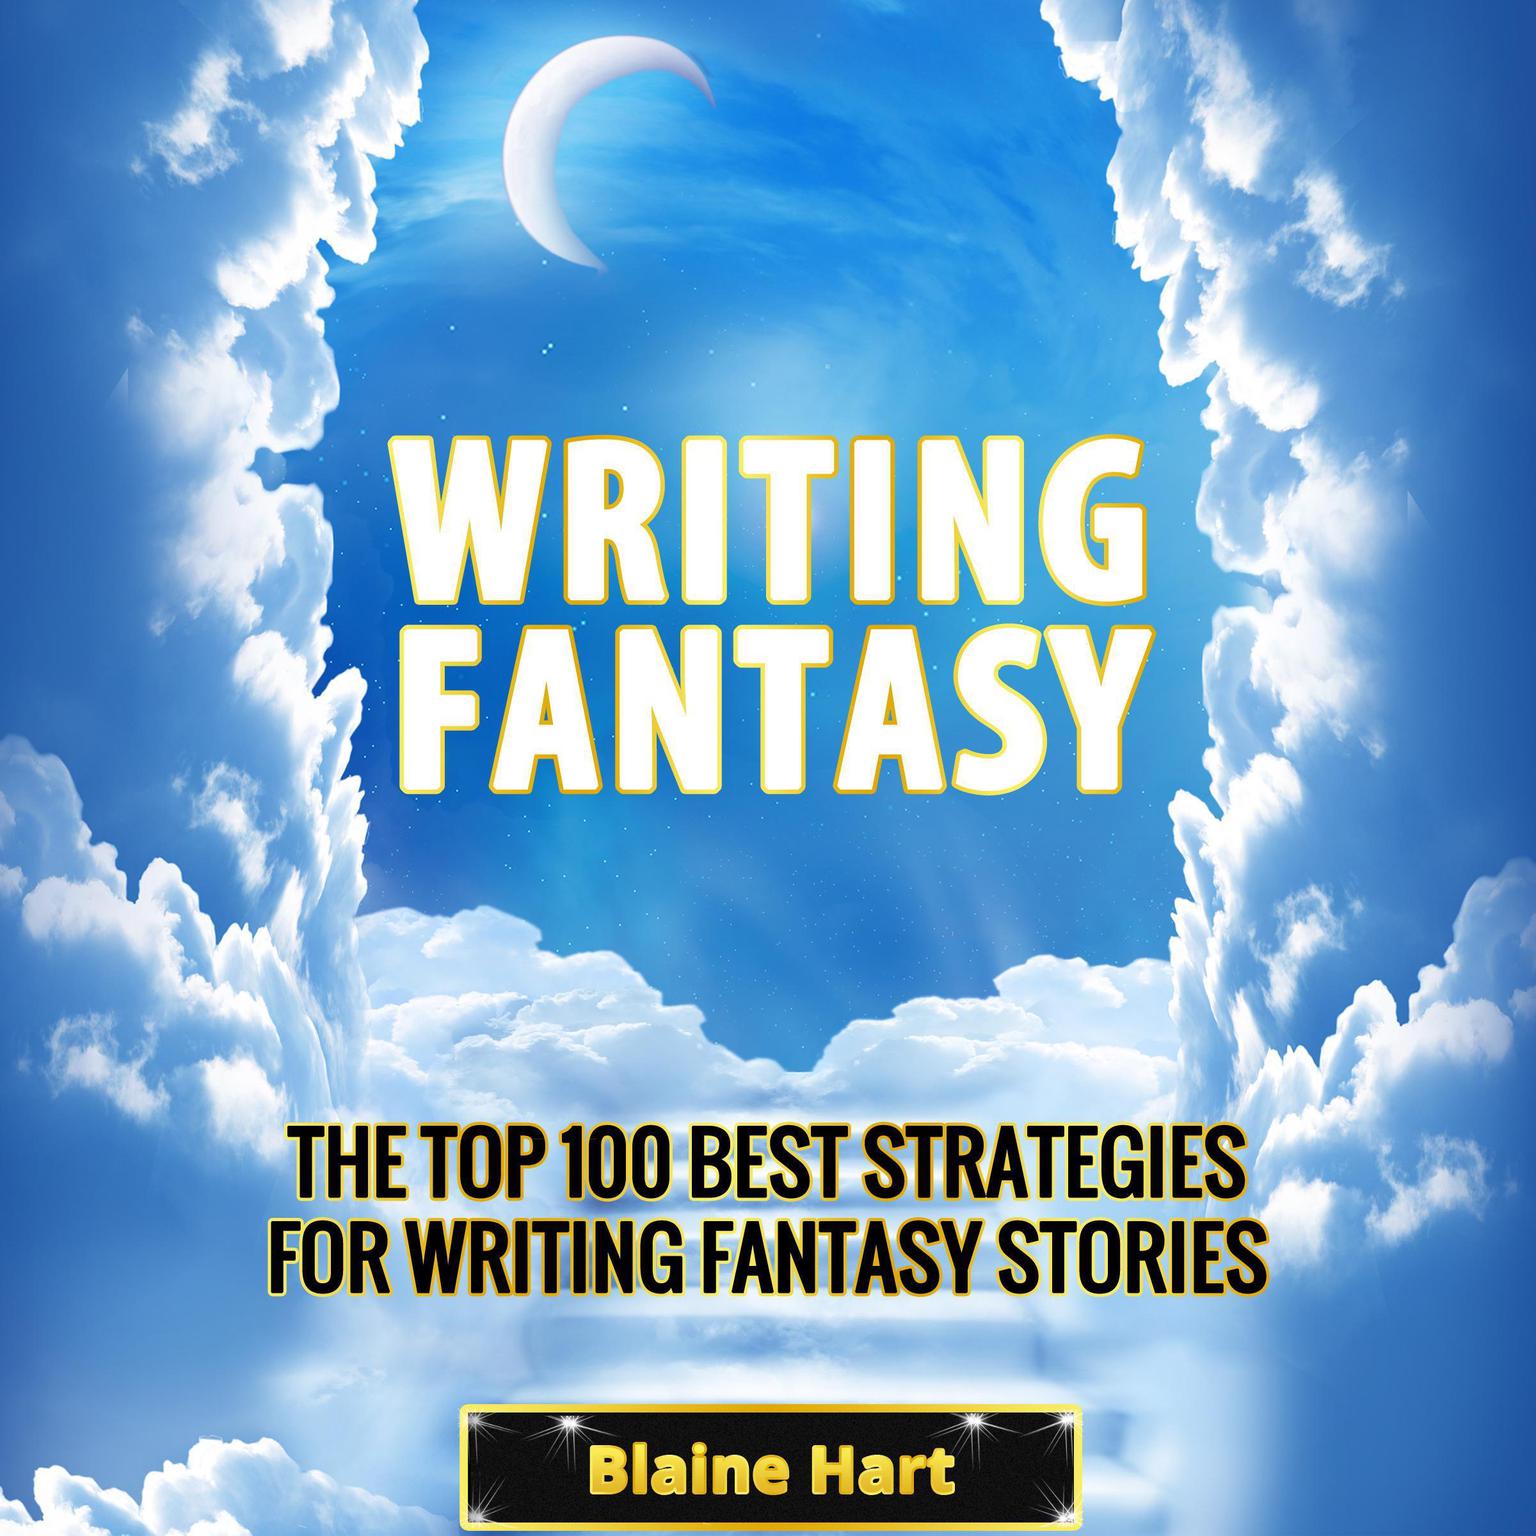 Writing Fantasy: The Top 100 Best Strategies For Writing Fantasy Stories Audiobook, by Blaine Hart